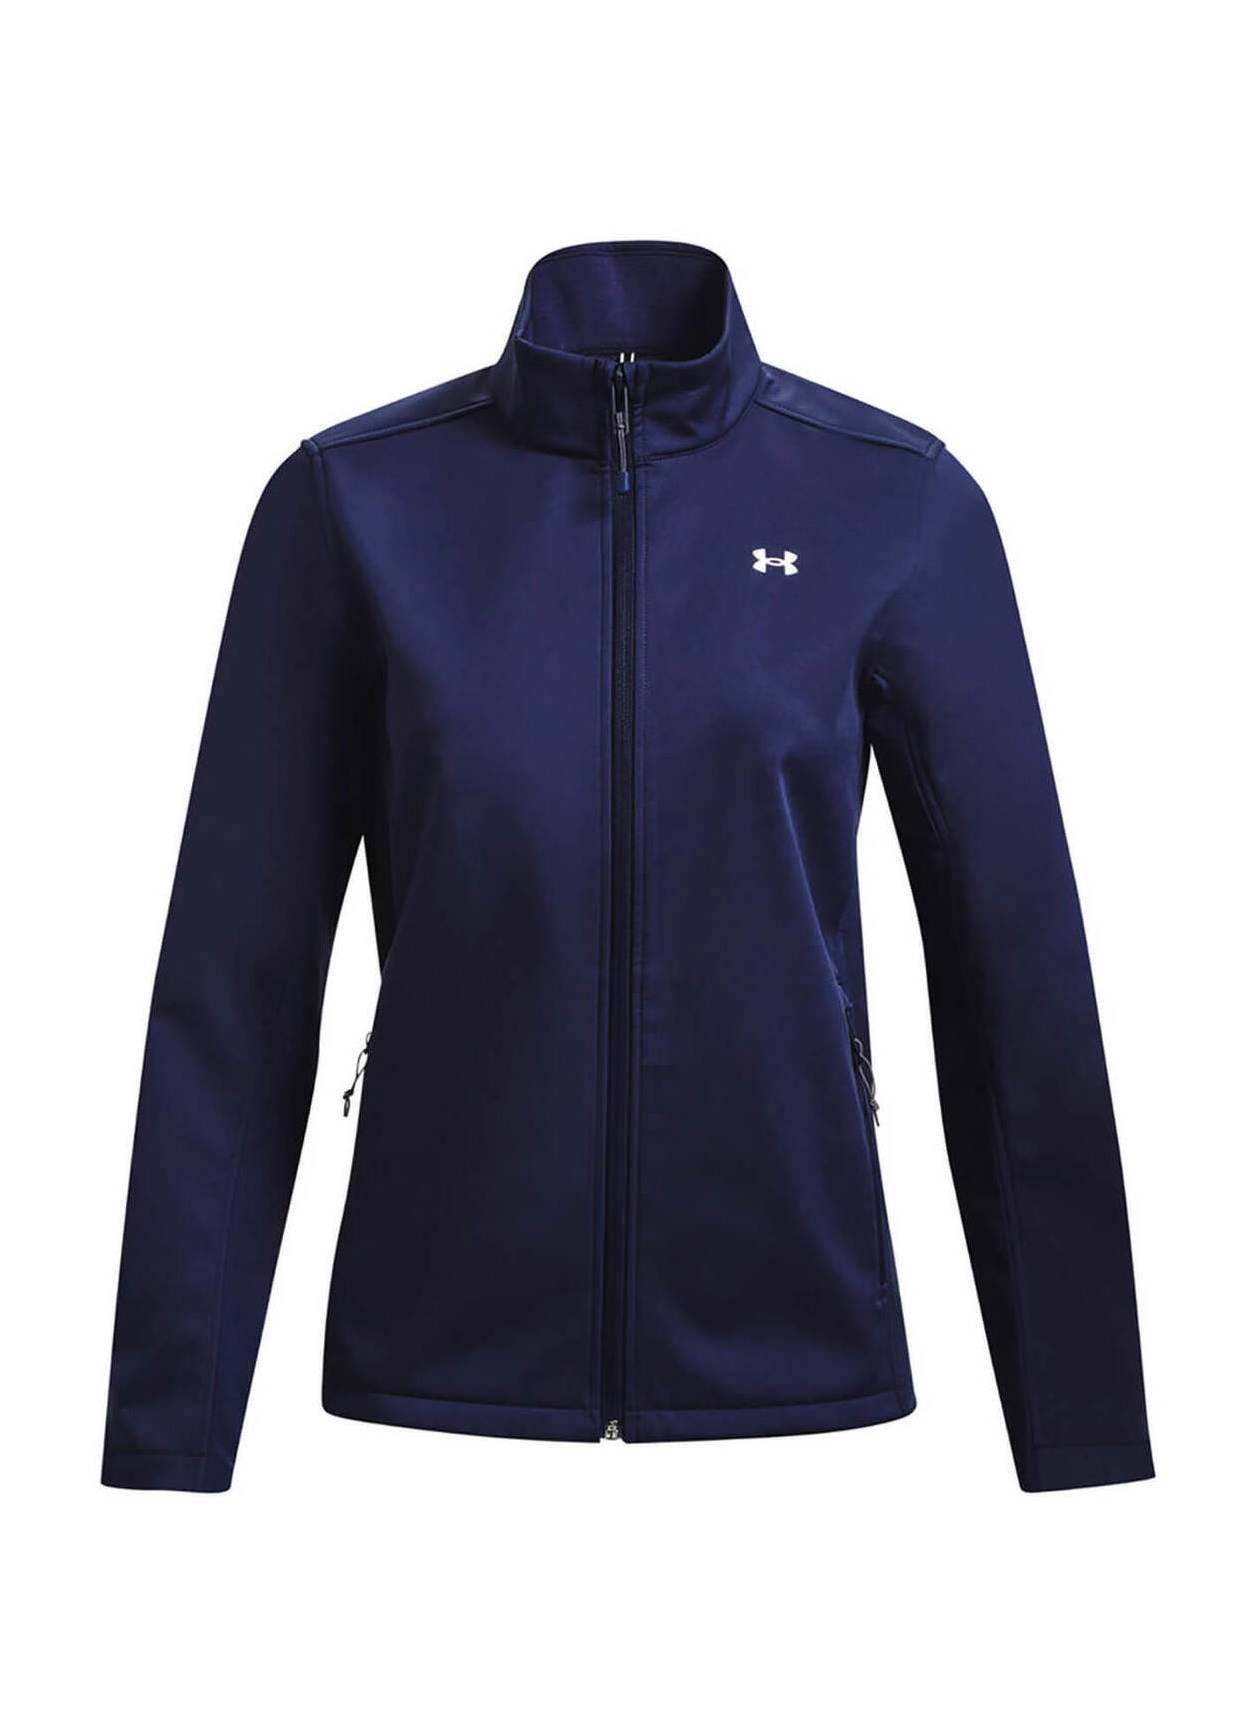 Branded Under Armour Women's Navy / White ColdGear Infrared Shield 2.0  Jacket